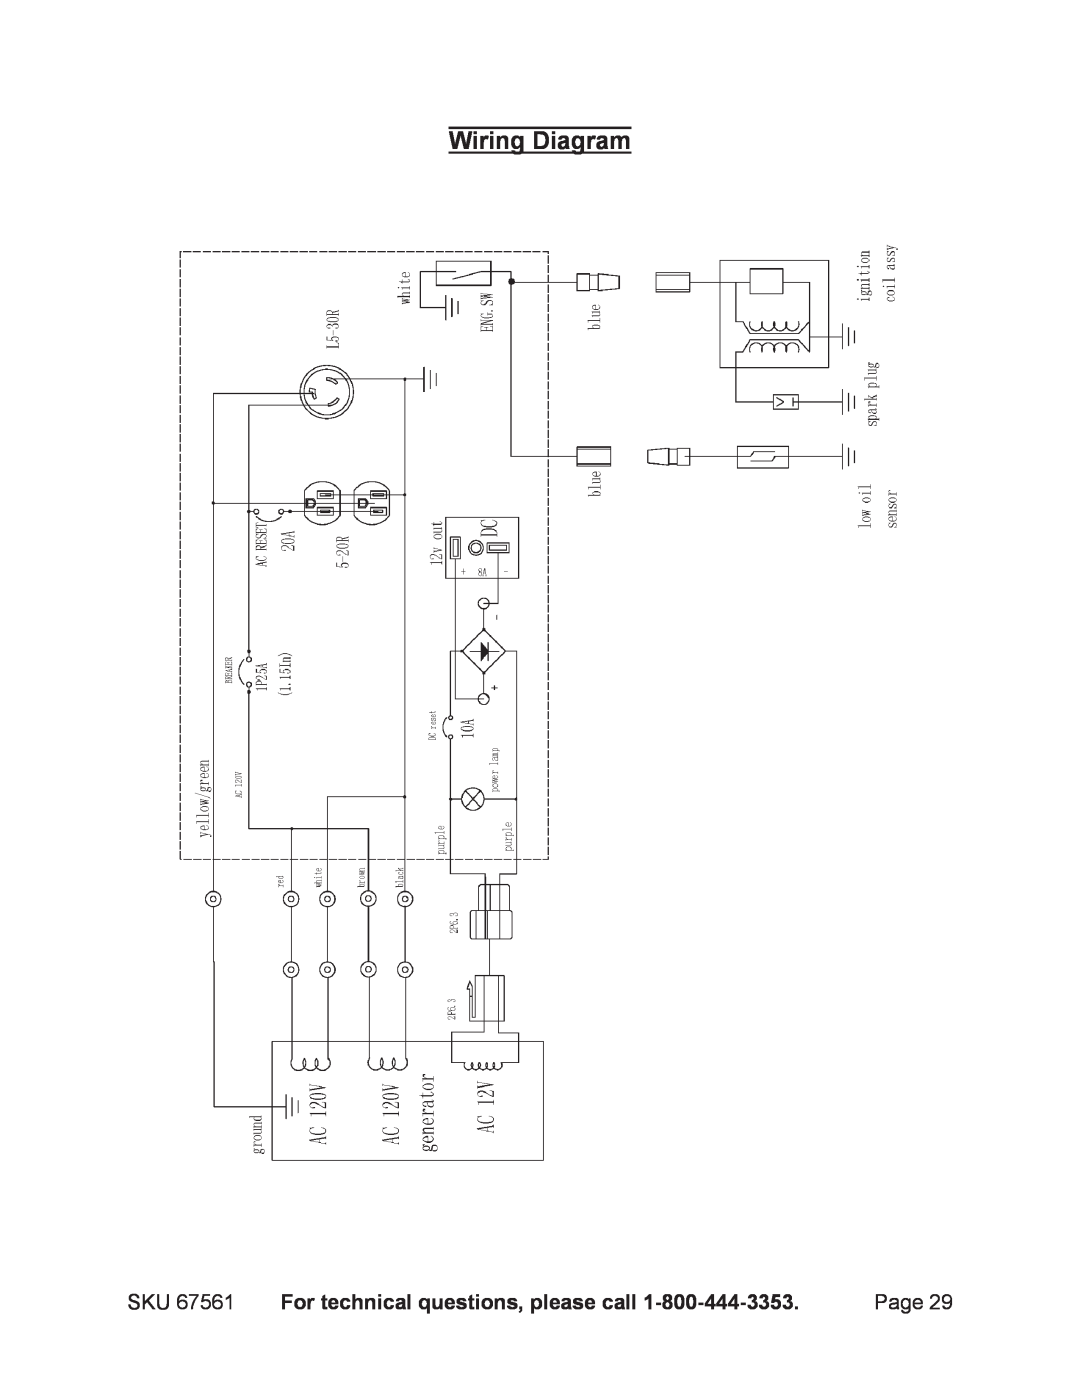 Chicago Electric 67561 manual Wiring Diagram, For technical questions, please call 